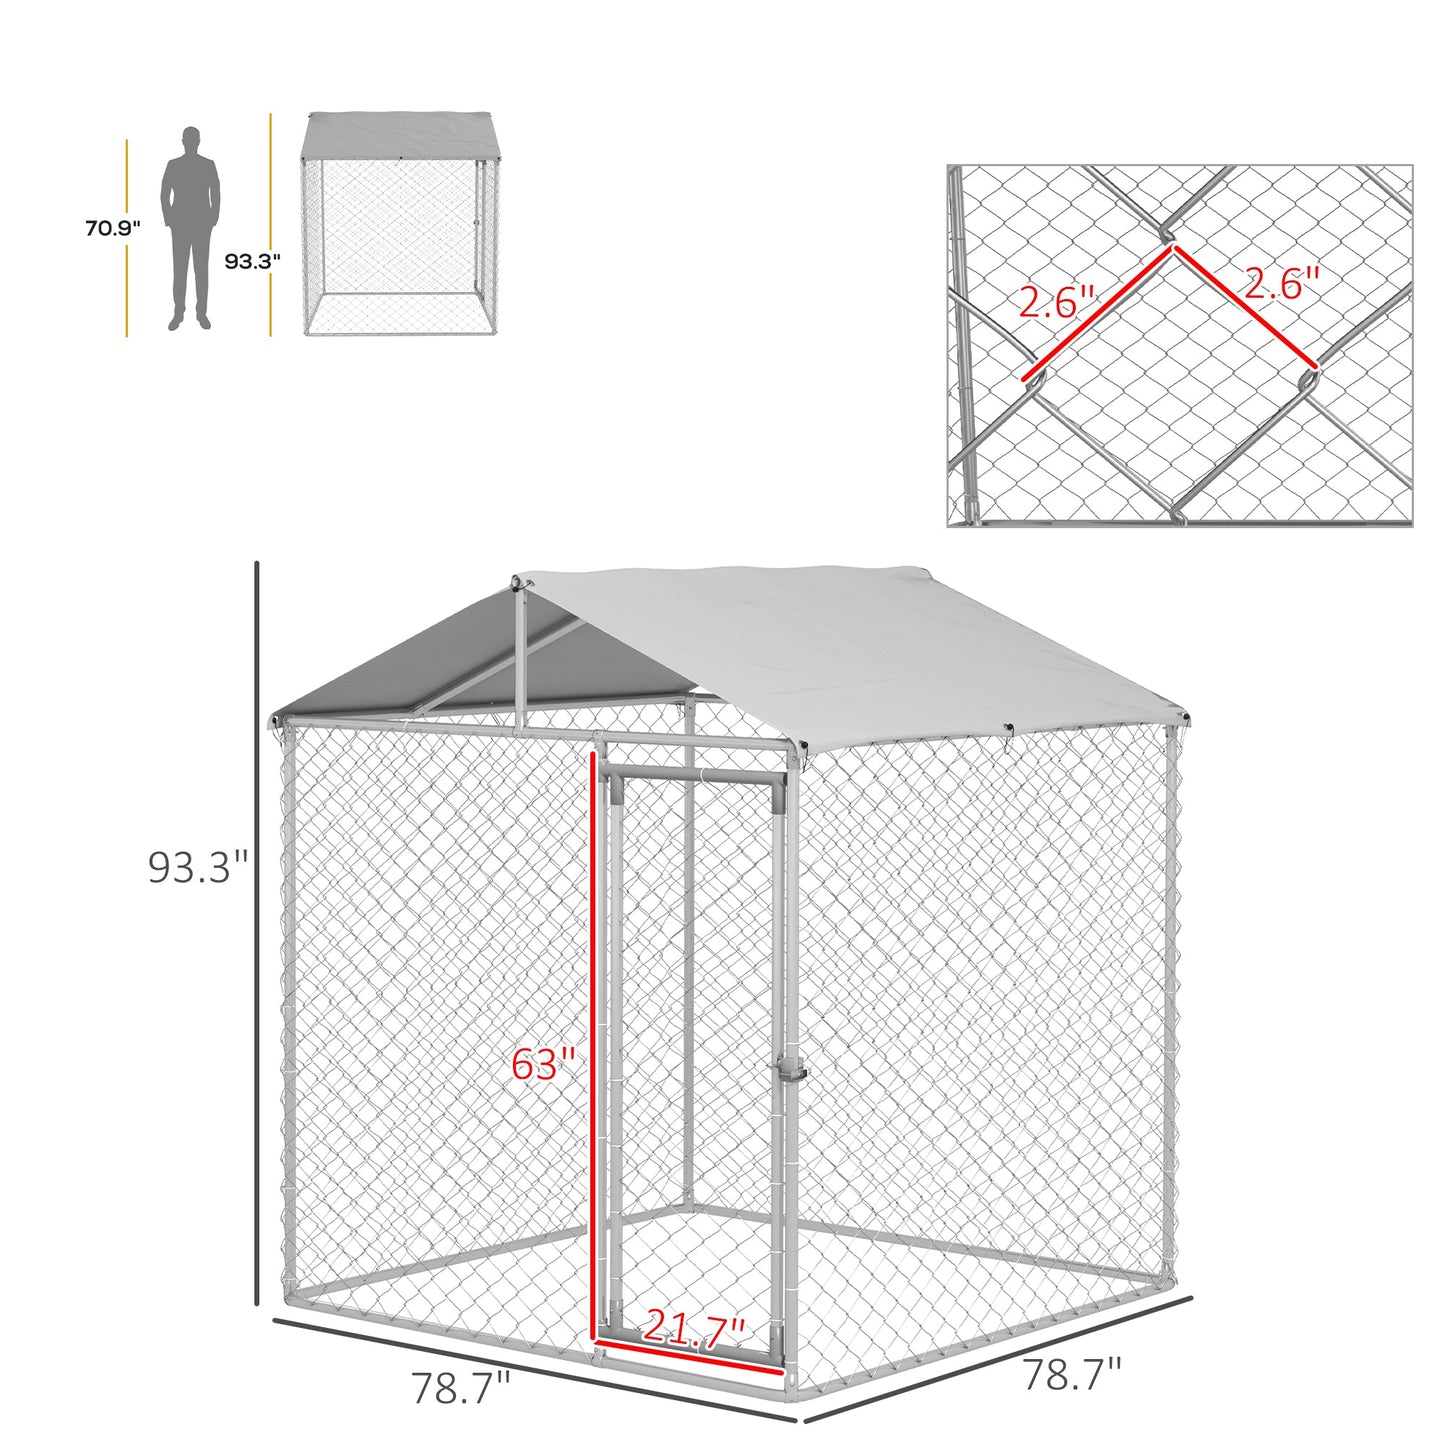 -PawHut 6.6' x 6.6' x 7.8' Dog Kennel Outdoor for Small Medium Dogs with Waterproof Roof, Silver - Outdoor Style Company